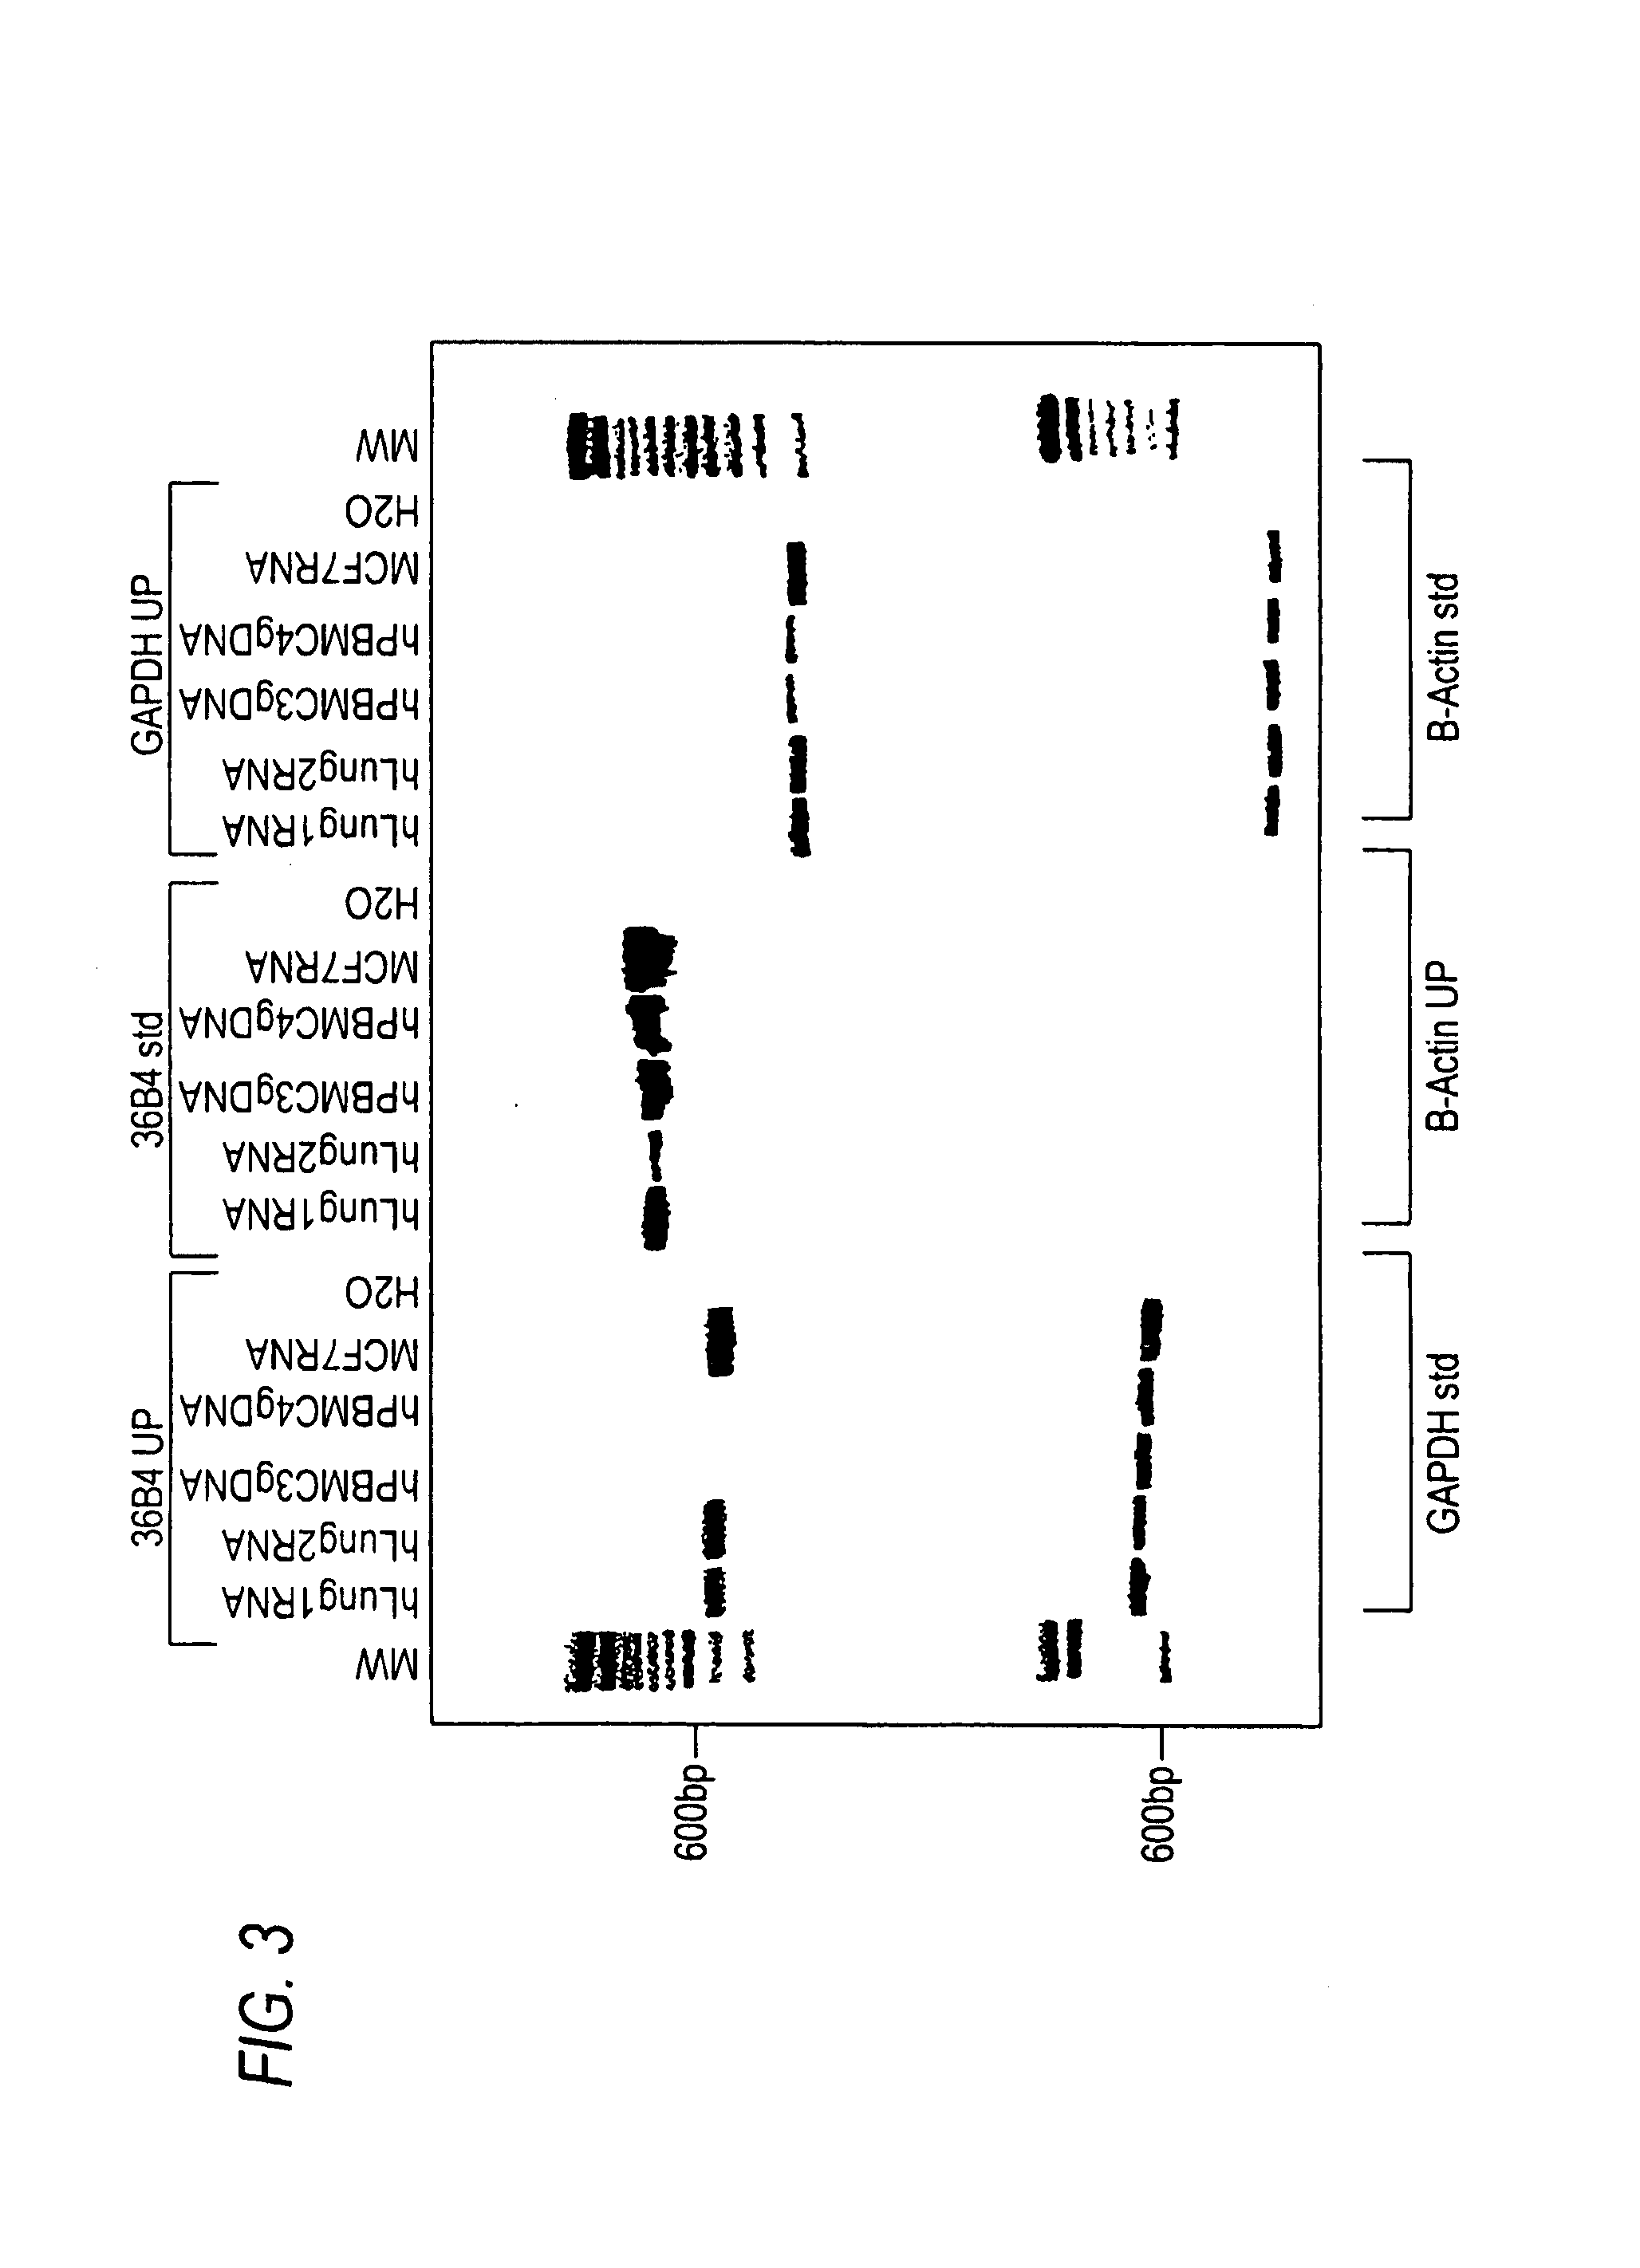 Universal RT-coupled PCR method for the specific amplification of mRNA